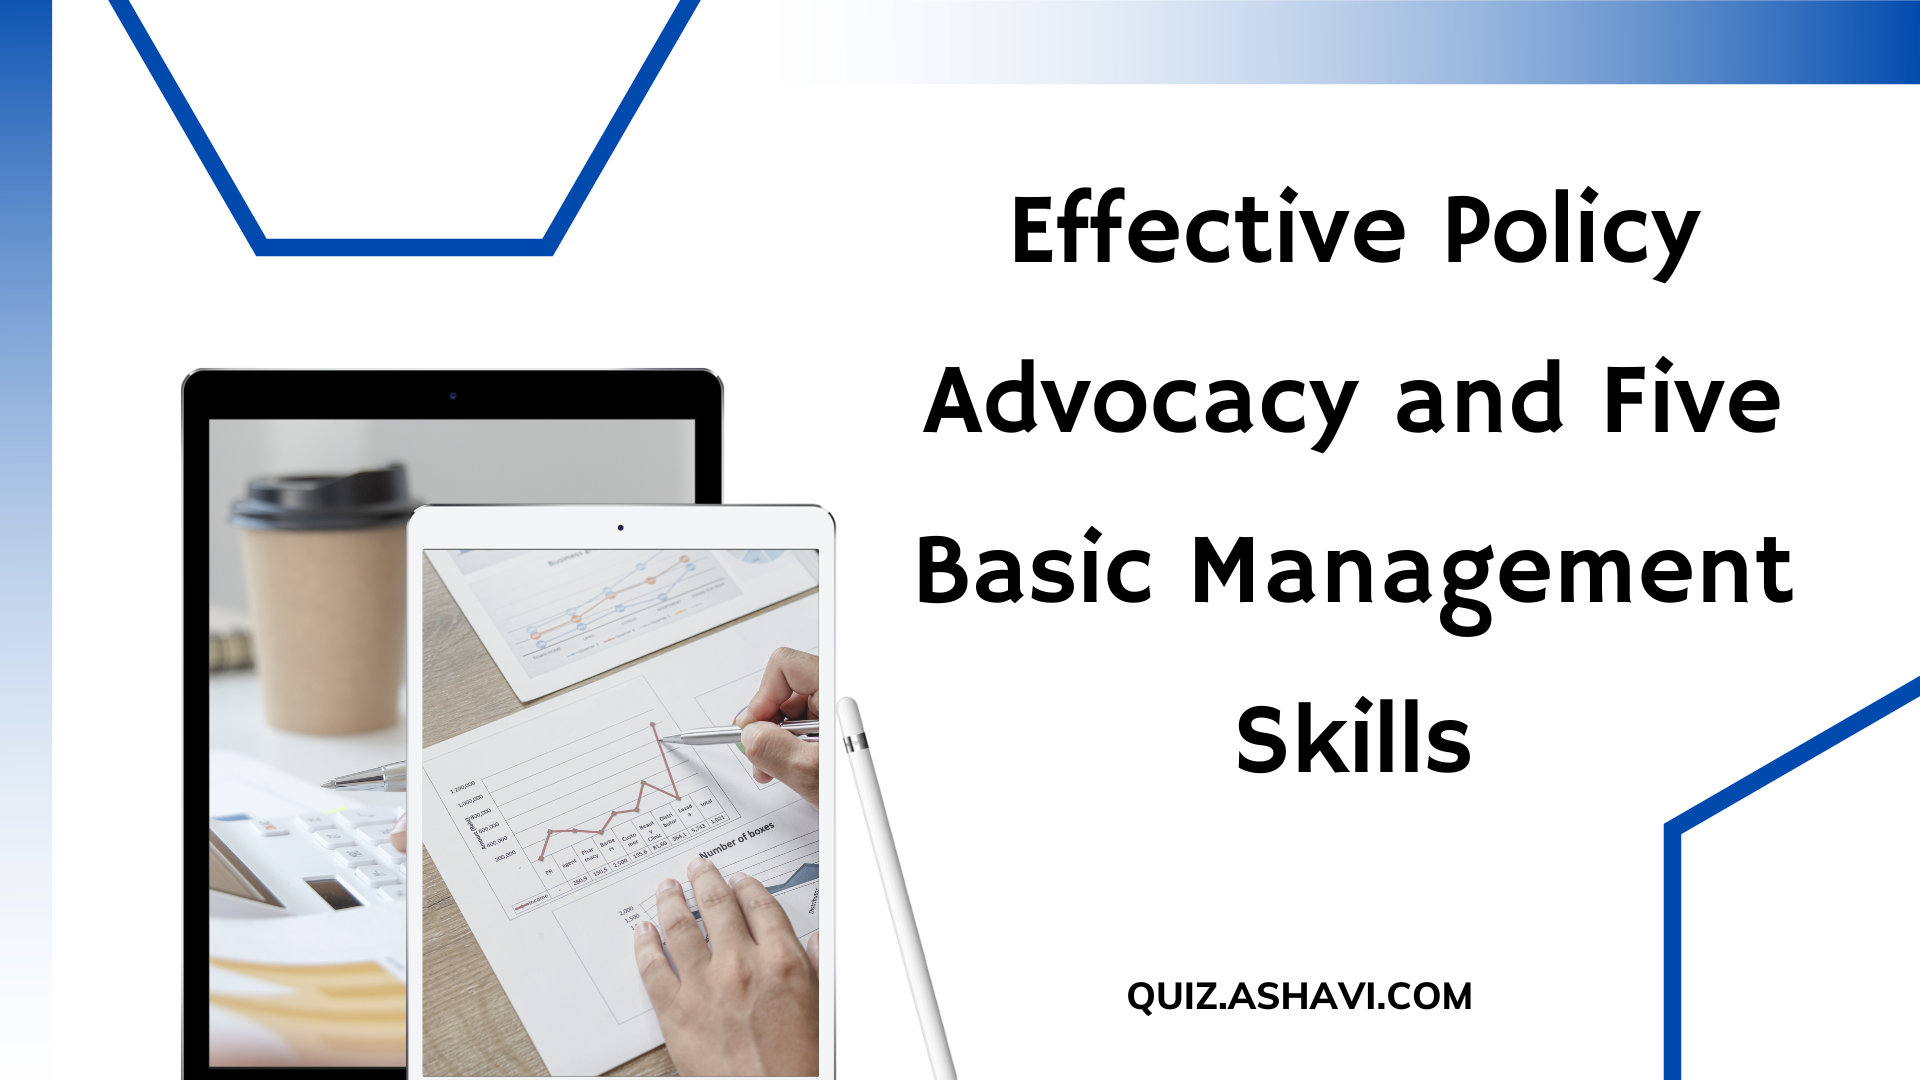 Effective Policy Advocacy and Five Basic Management Skills